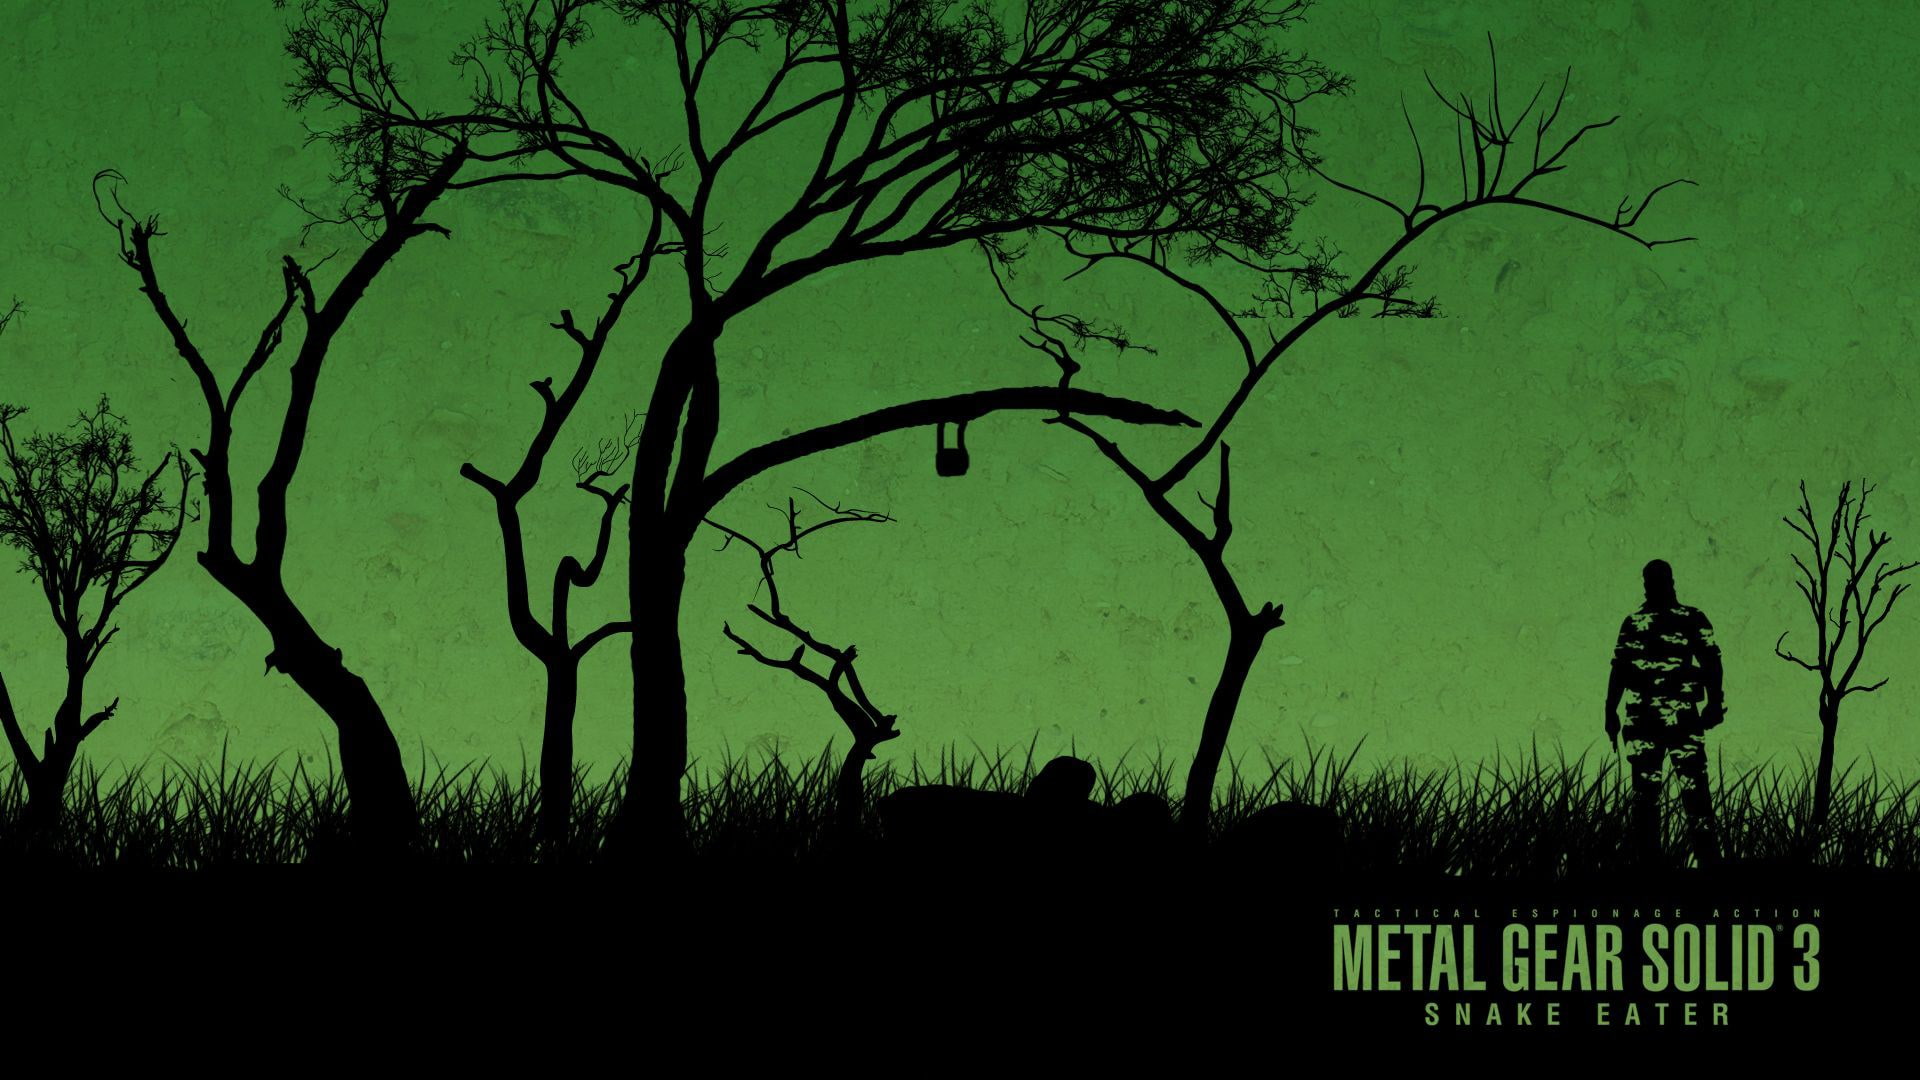 metal gear solid 3 snake eater, plant, tree, nature, silhouette